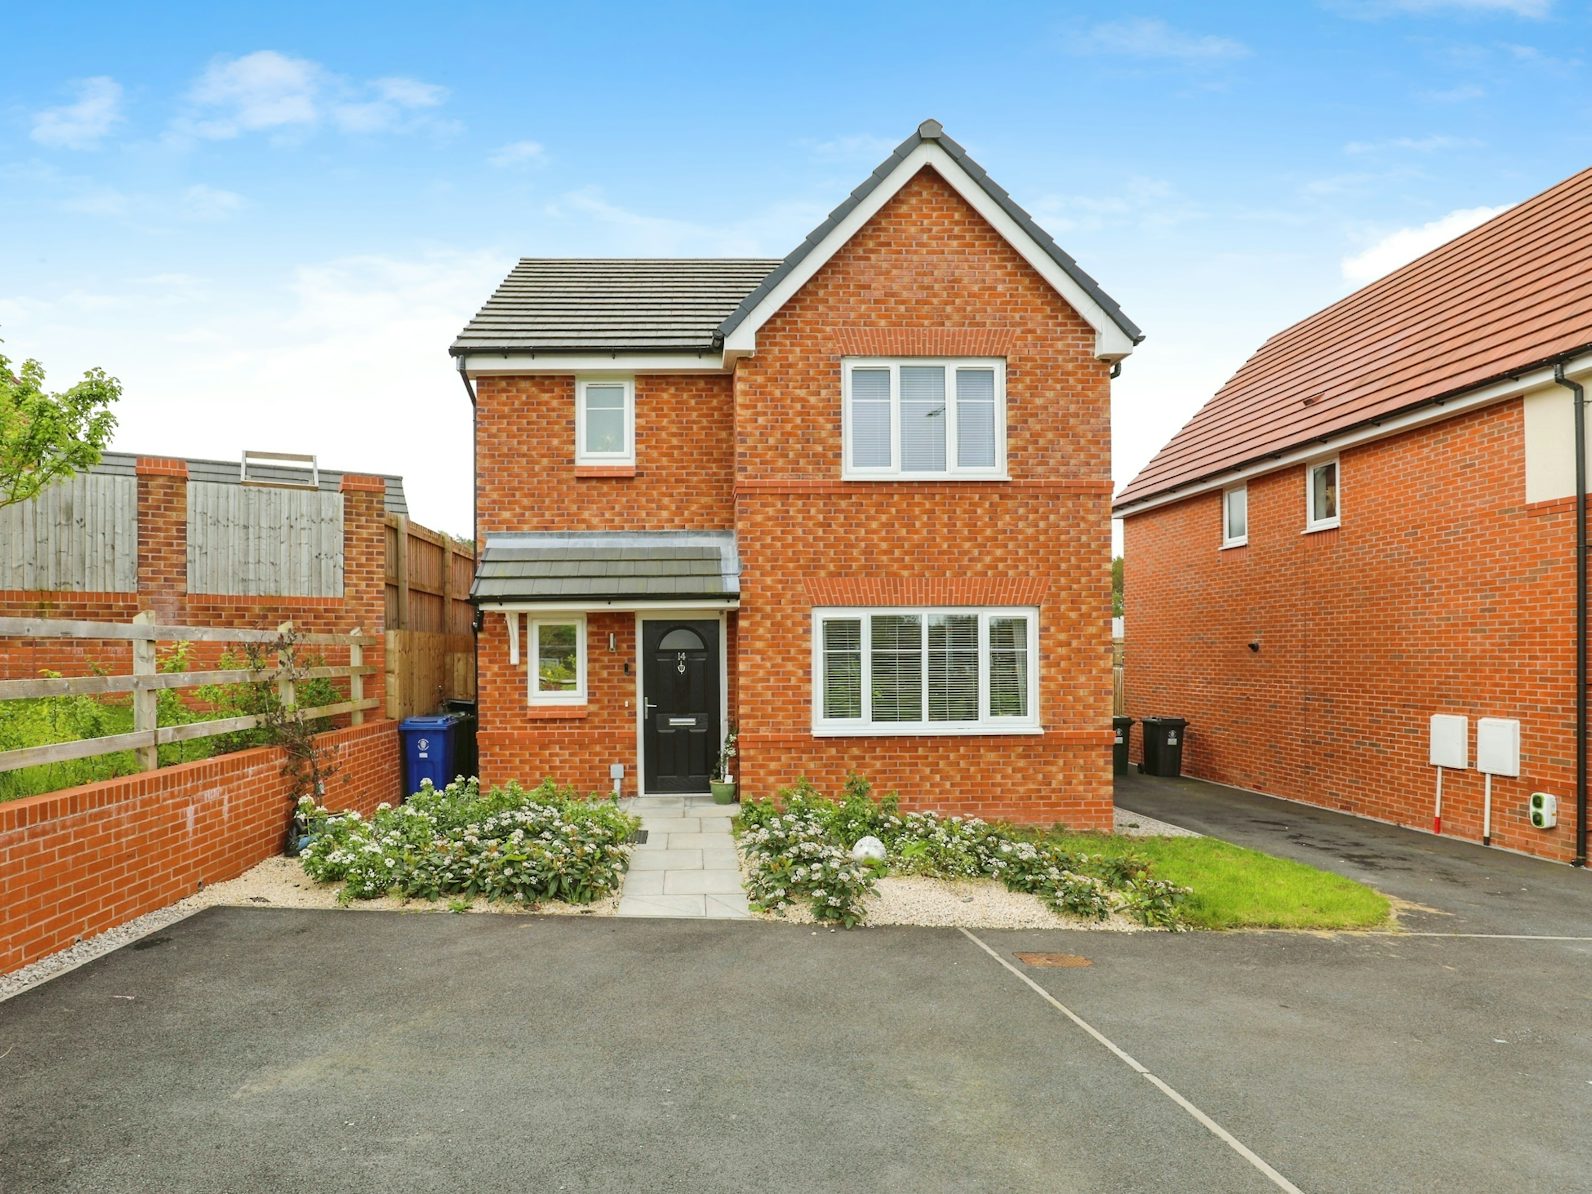 Detached House for sale on Overdale Way Skelmersdale, WN8